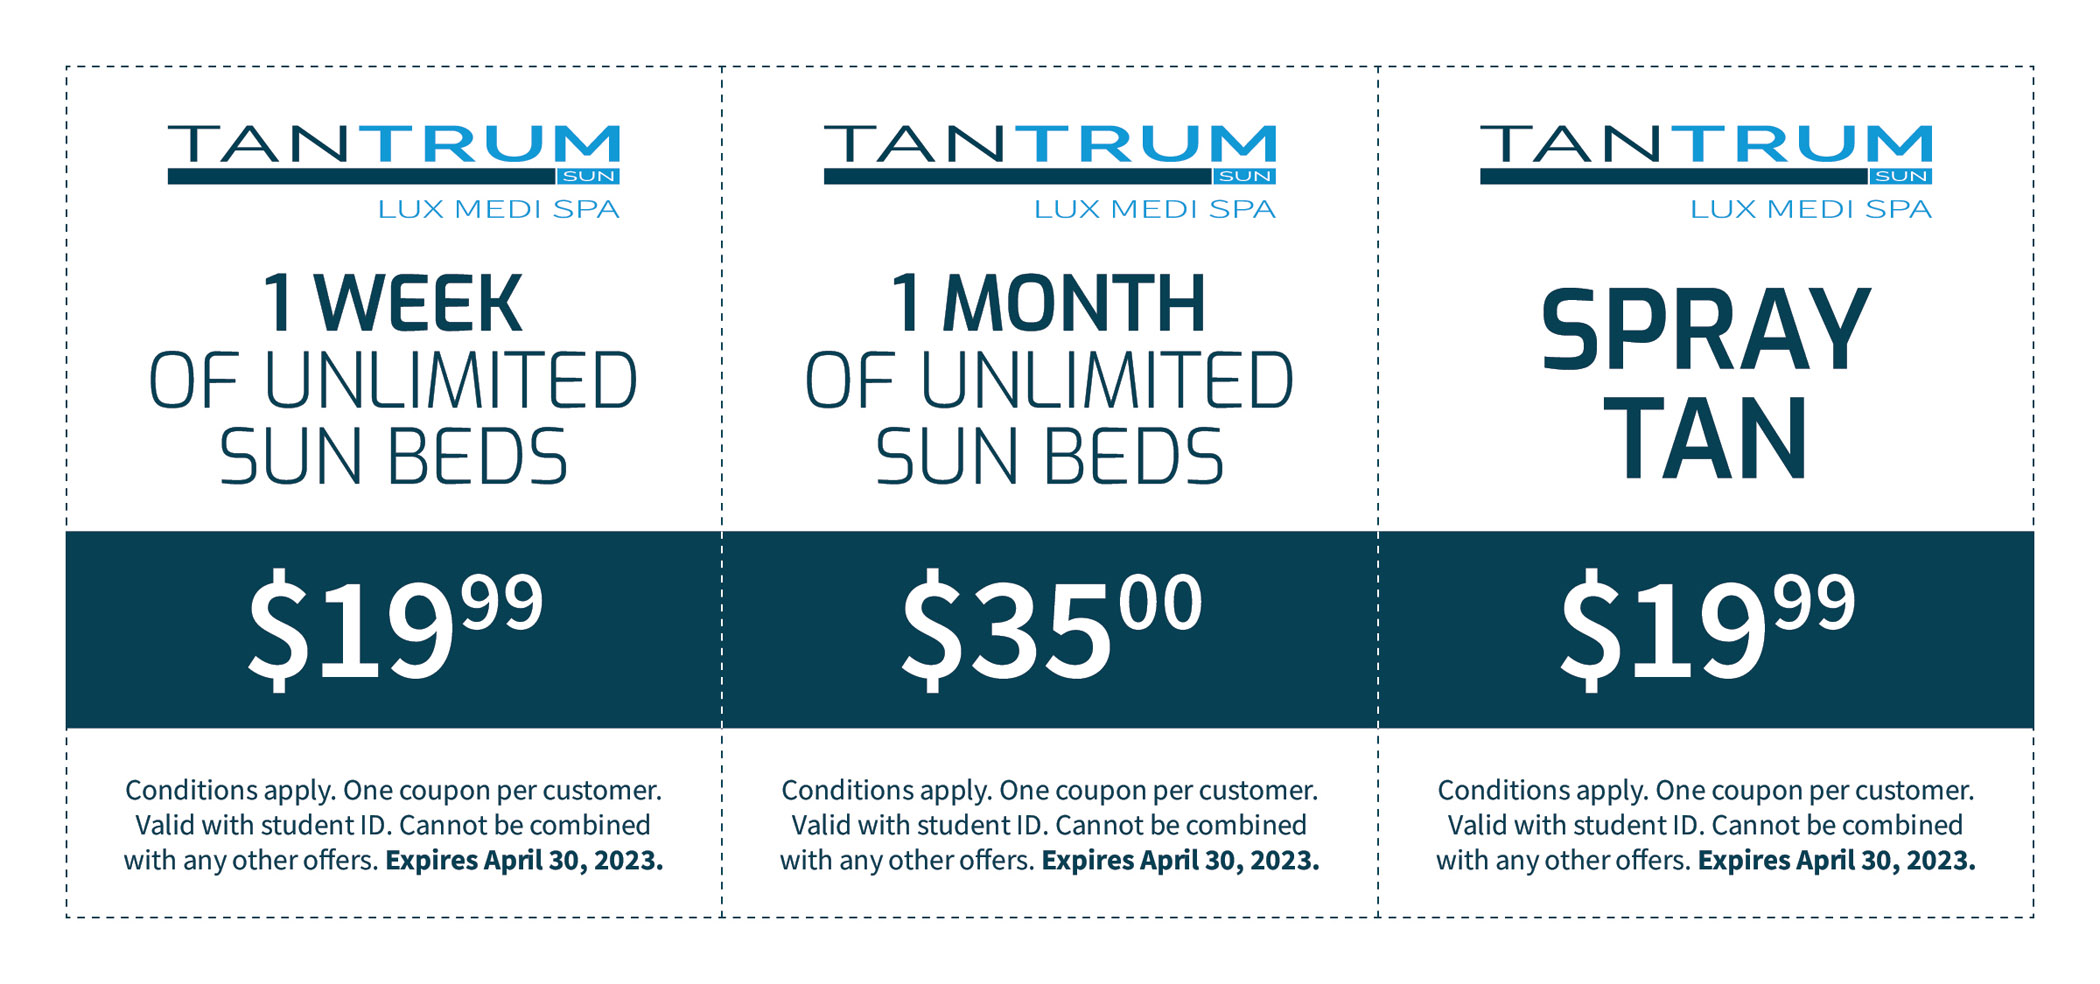 1 week of unlimited sun beds for $19.99